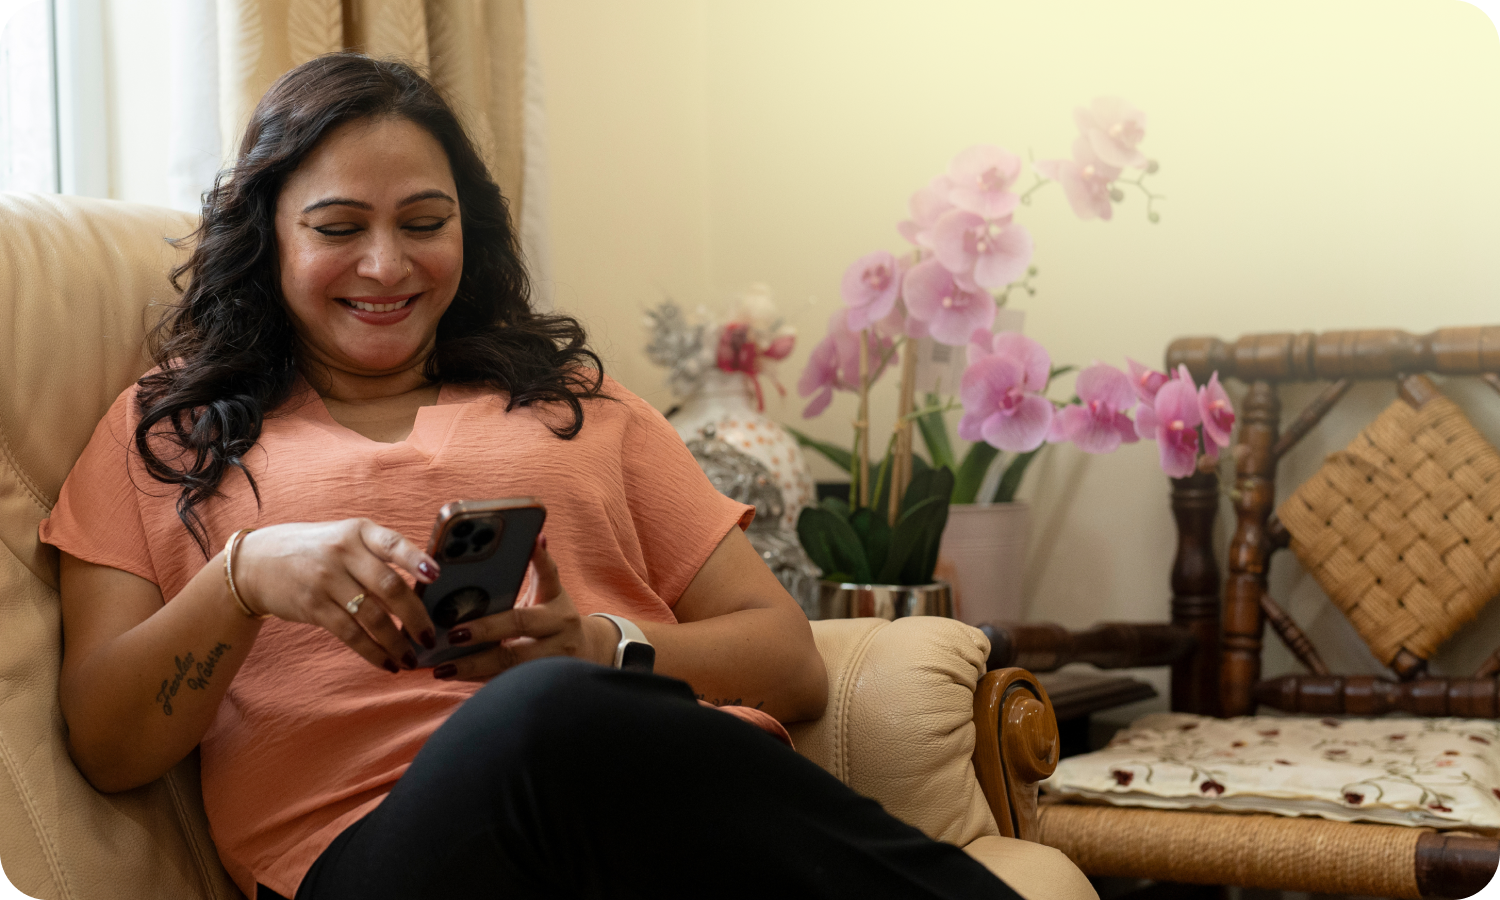 Female sitting on couch looking at her phone smiling 